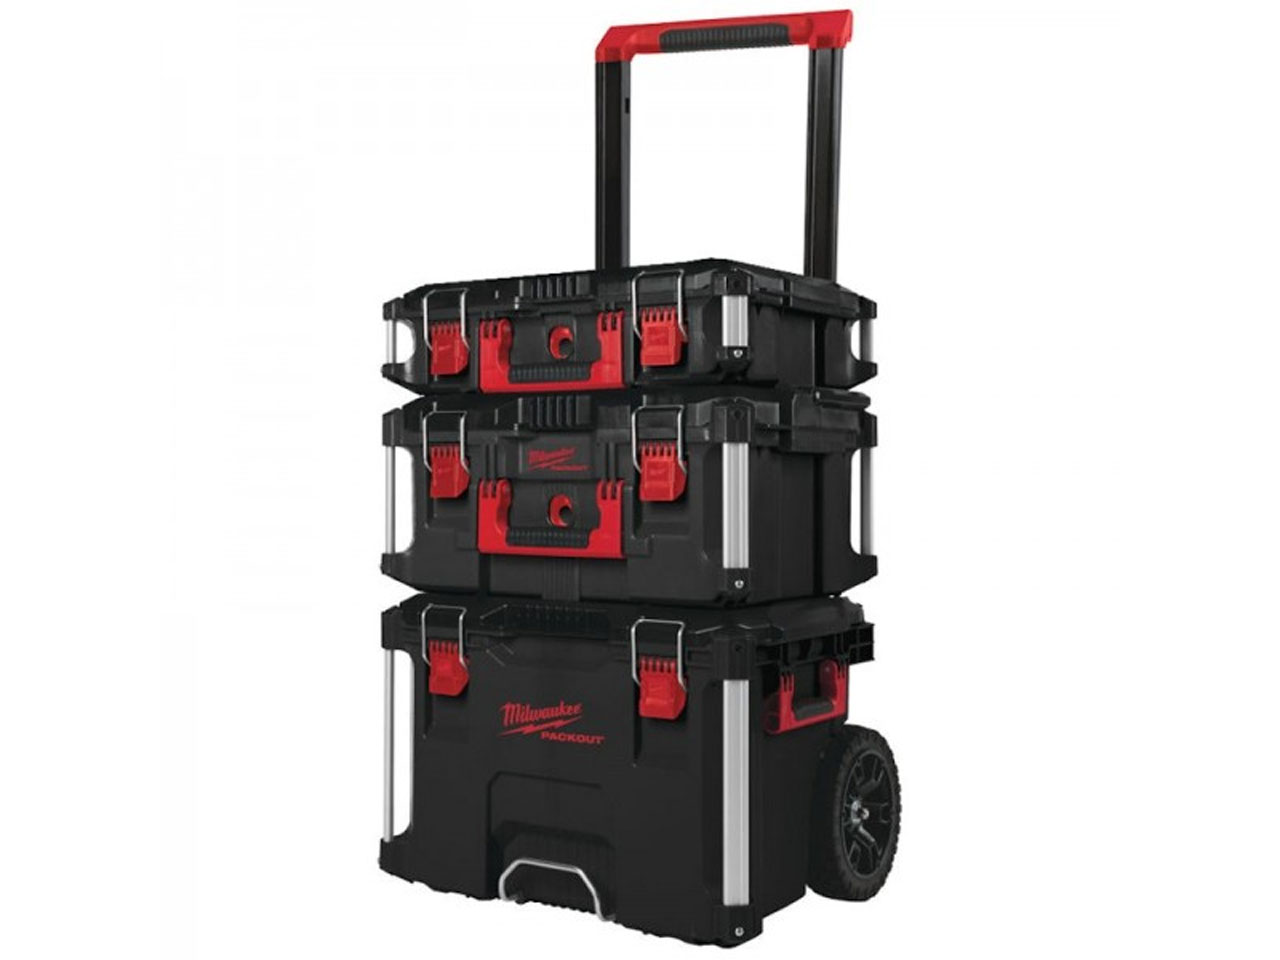 toolbox pc case